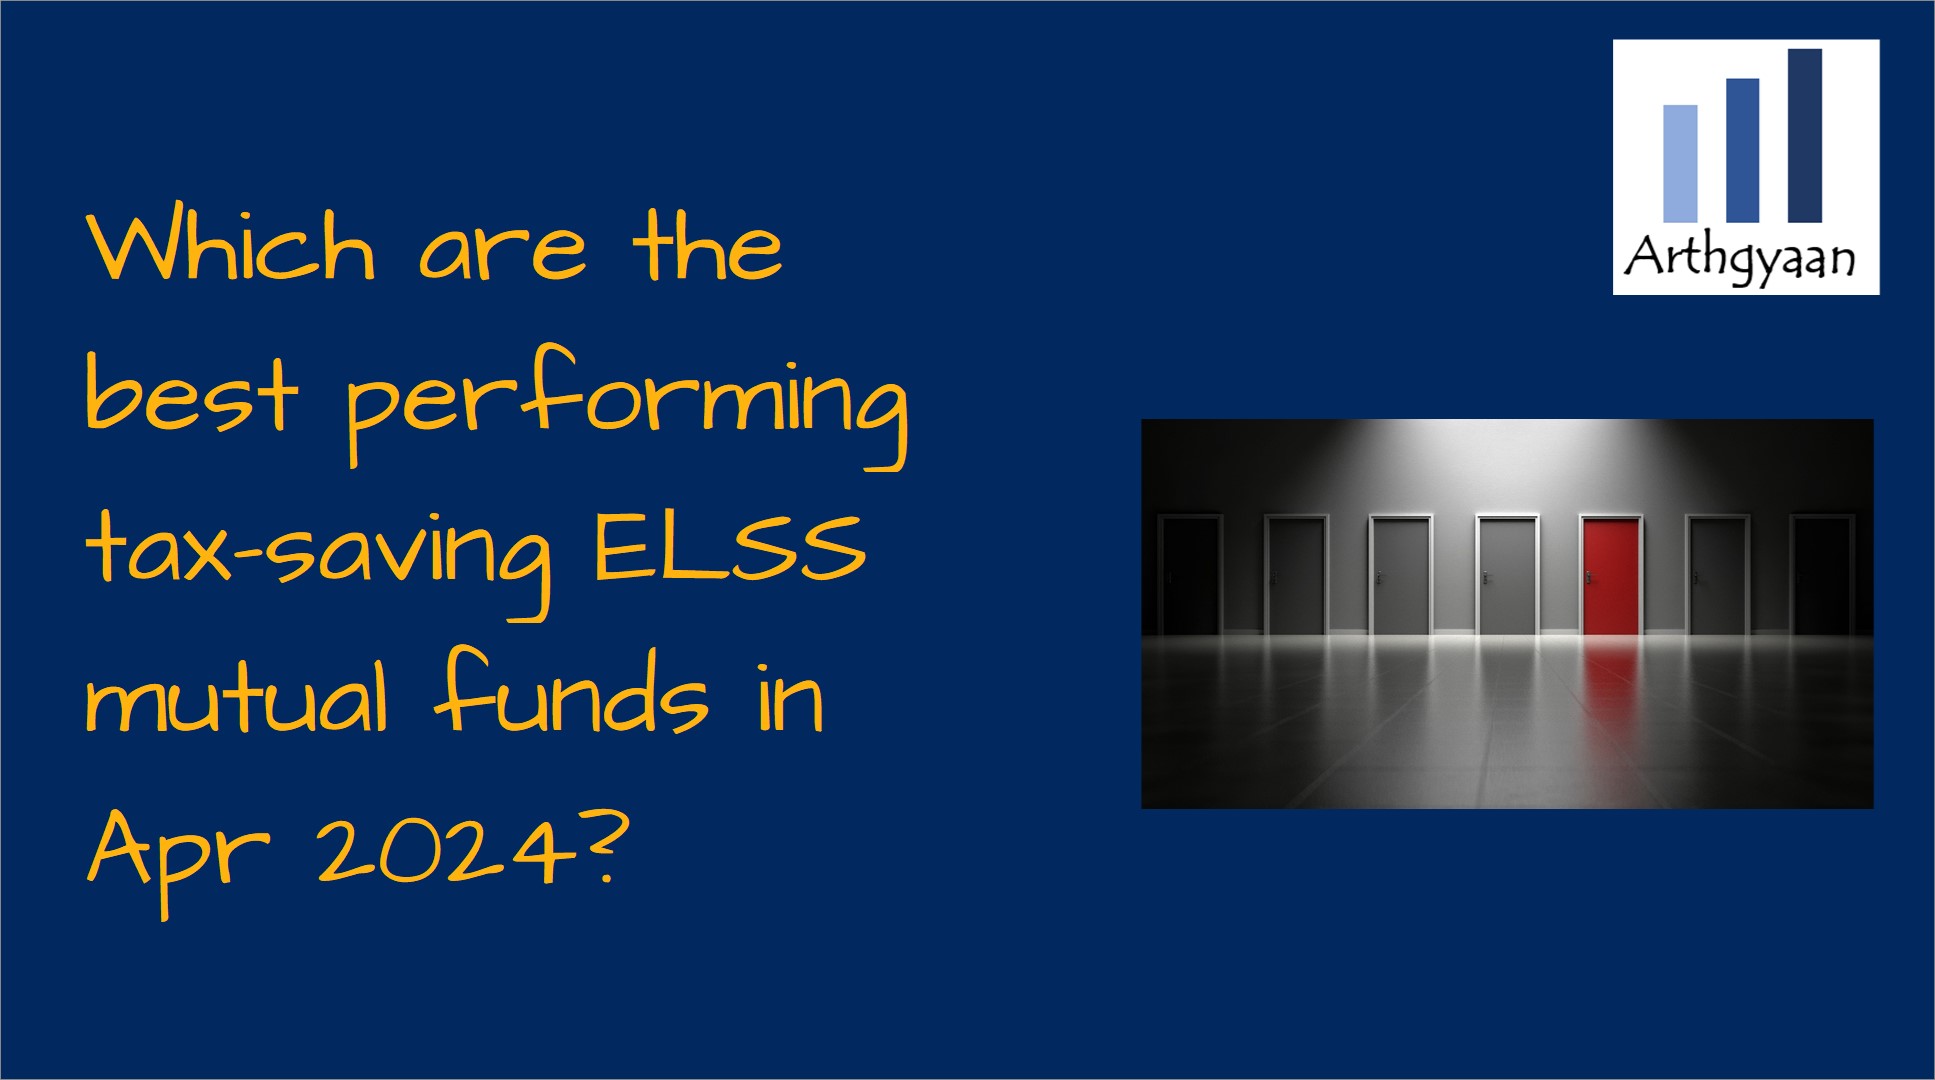 Which are the best performing tax-saving ELSS mutual funds in Apr 2024?